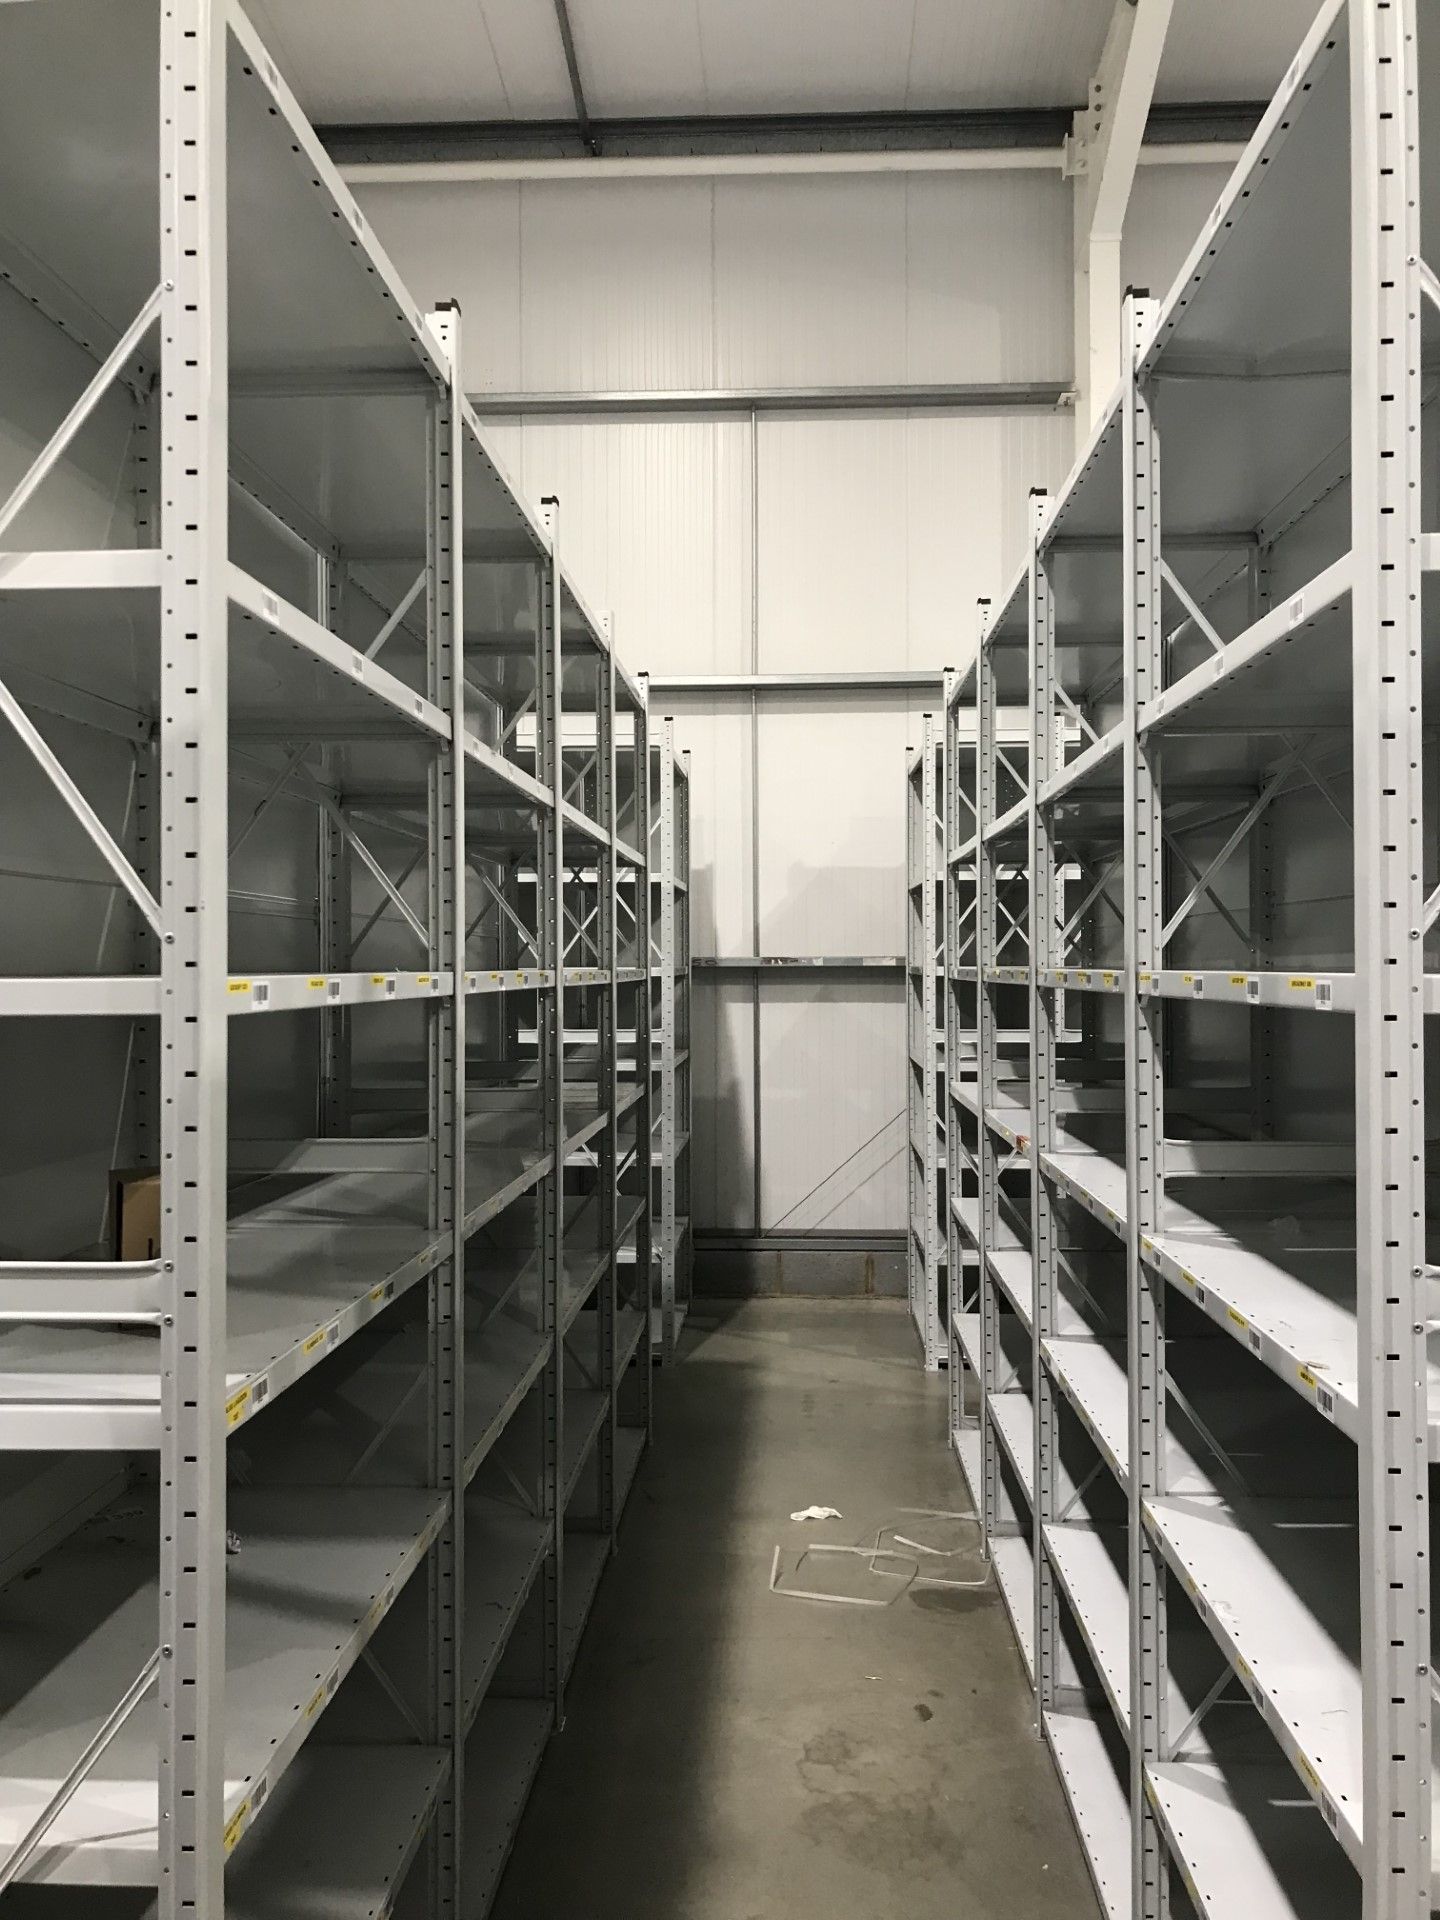 Link 51 racking – less than 5 years old installed new Aug 2019 - Image 7 of 7